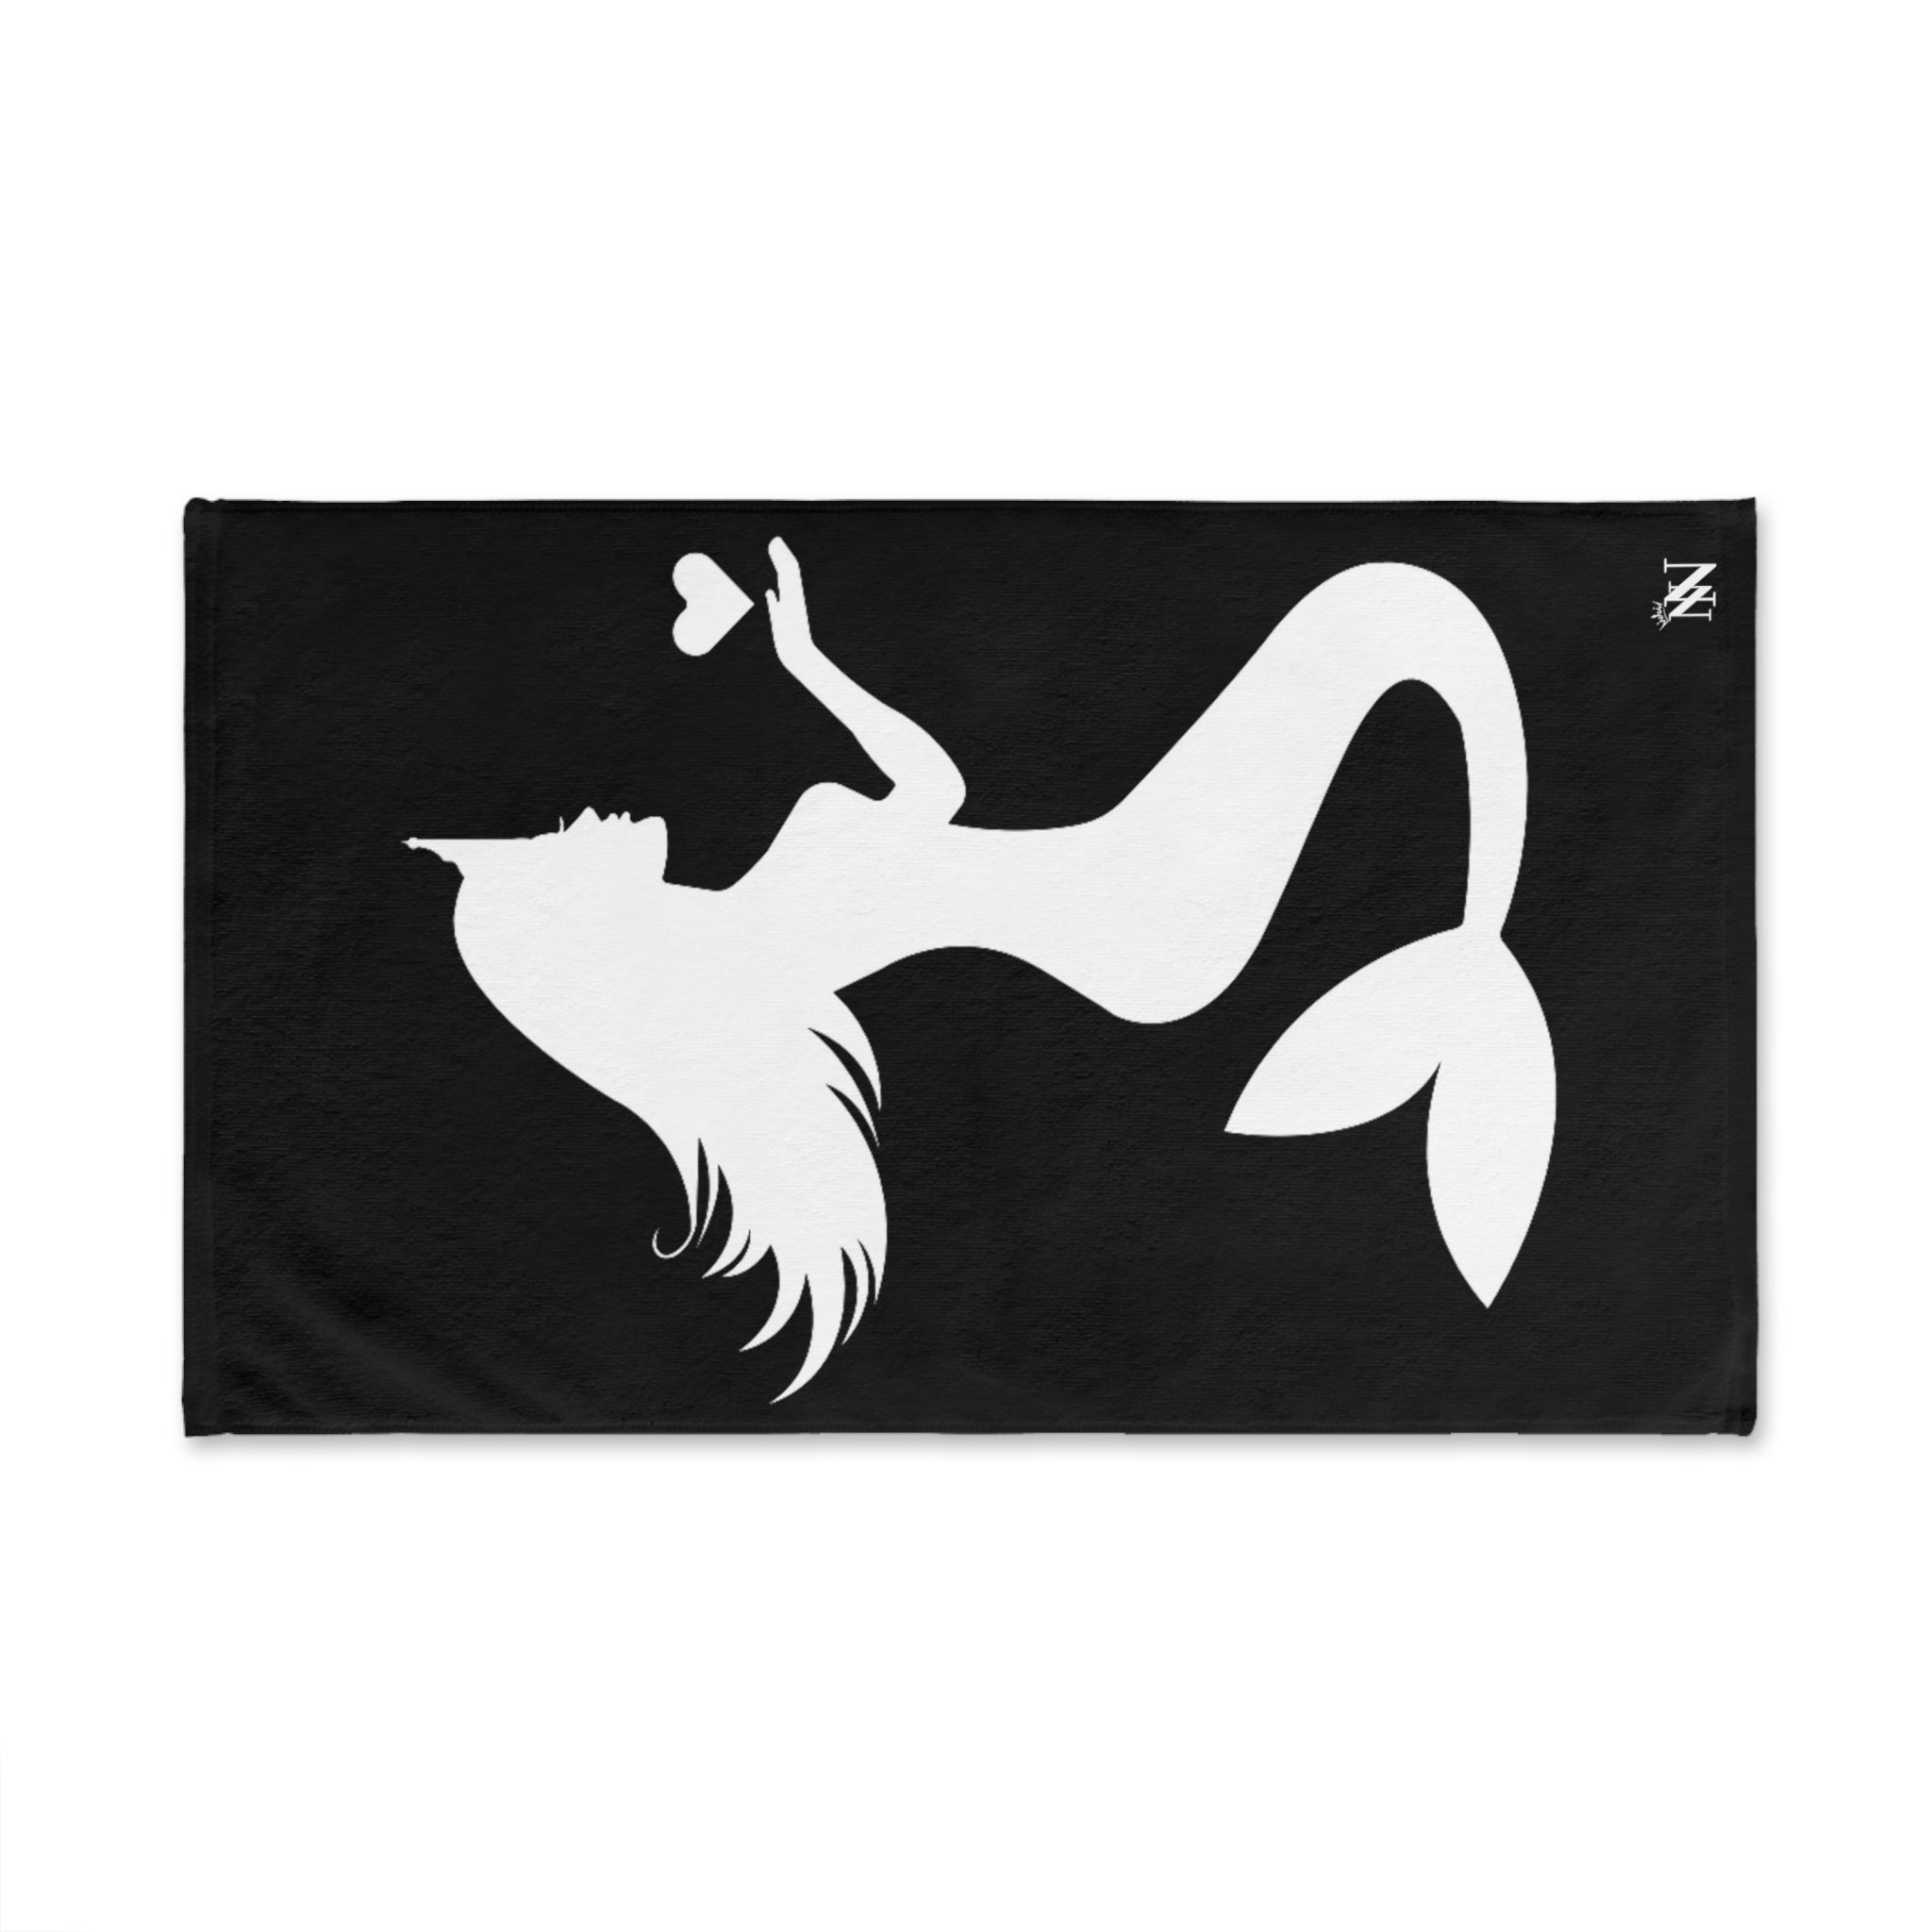 Pray Mermaid Heart Black | Sexy Gifts for Boyfriend, Funny Towel Romantic Gift for Wedding Couple Fiance First Year 2nd Anniversary Valentines, Party Gag Gifts, Joke Humor Cloth for Husband Men BF NECTAR NAPKINS